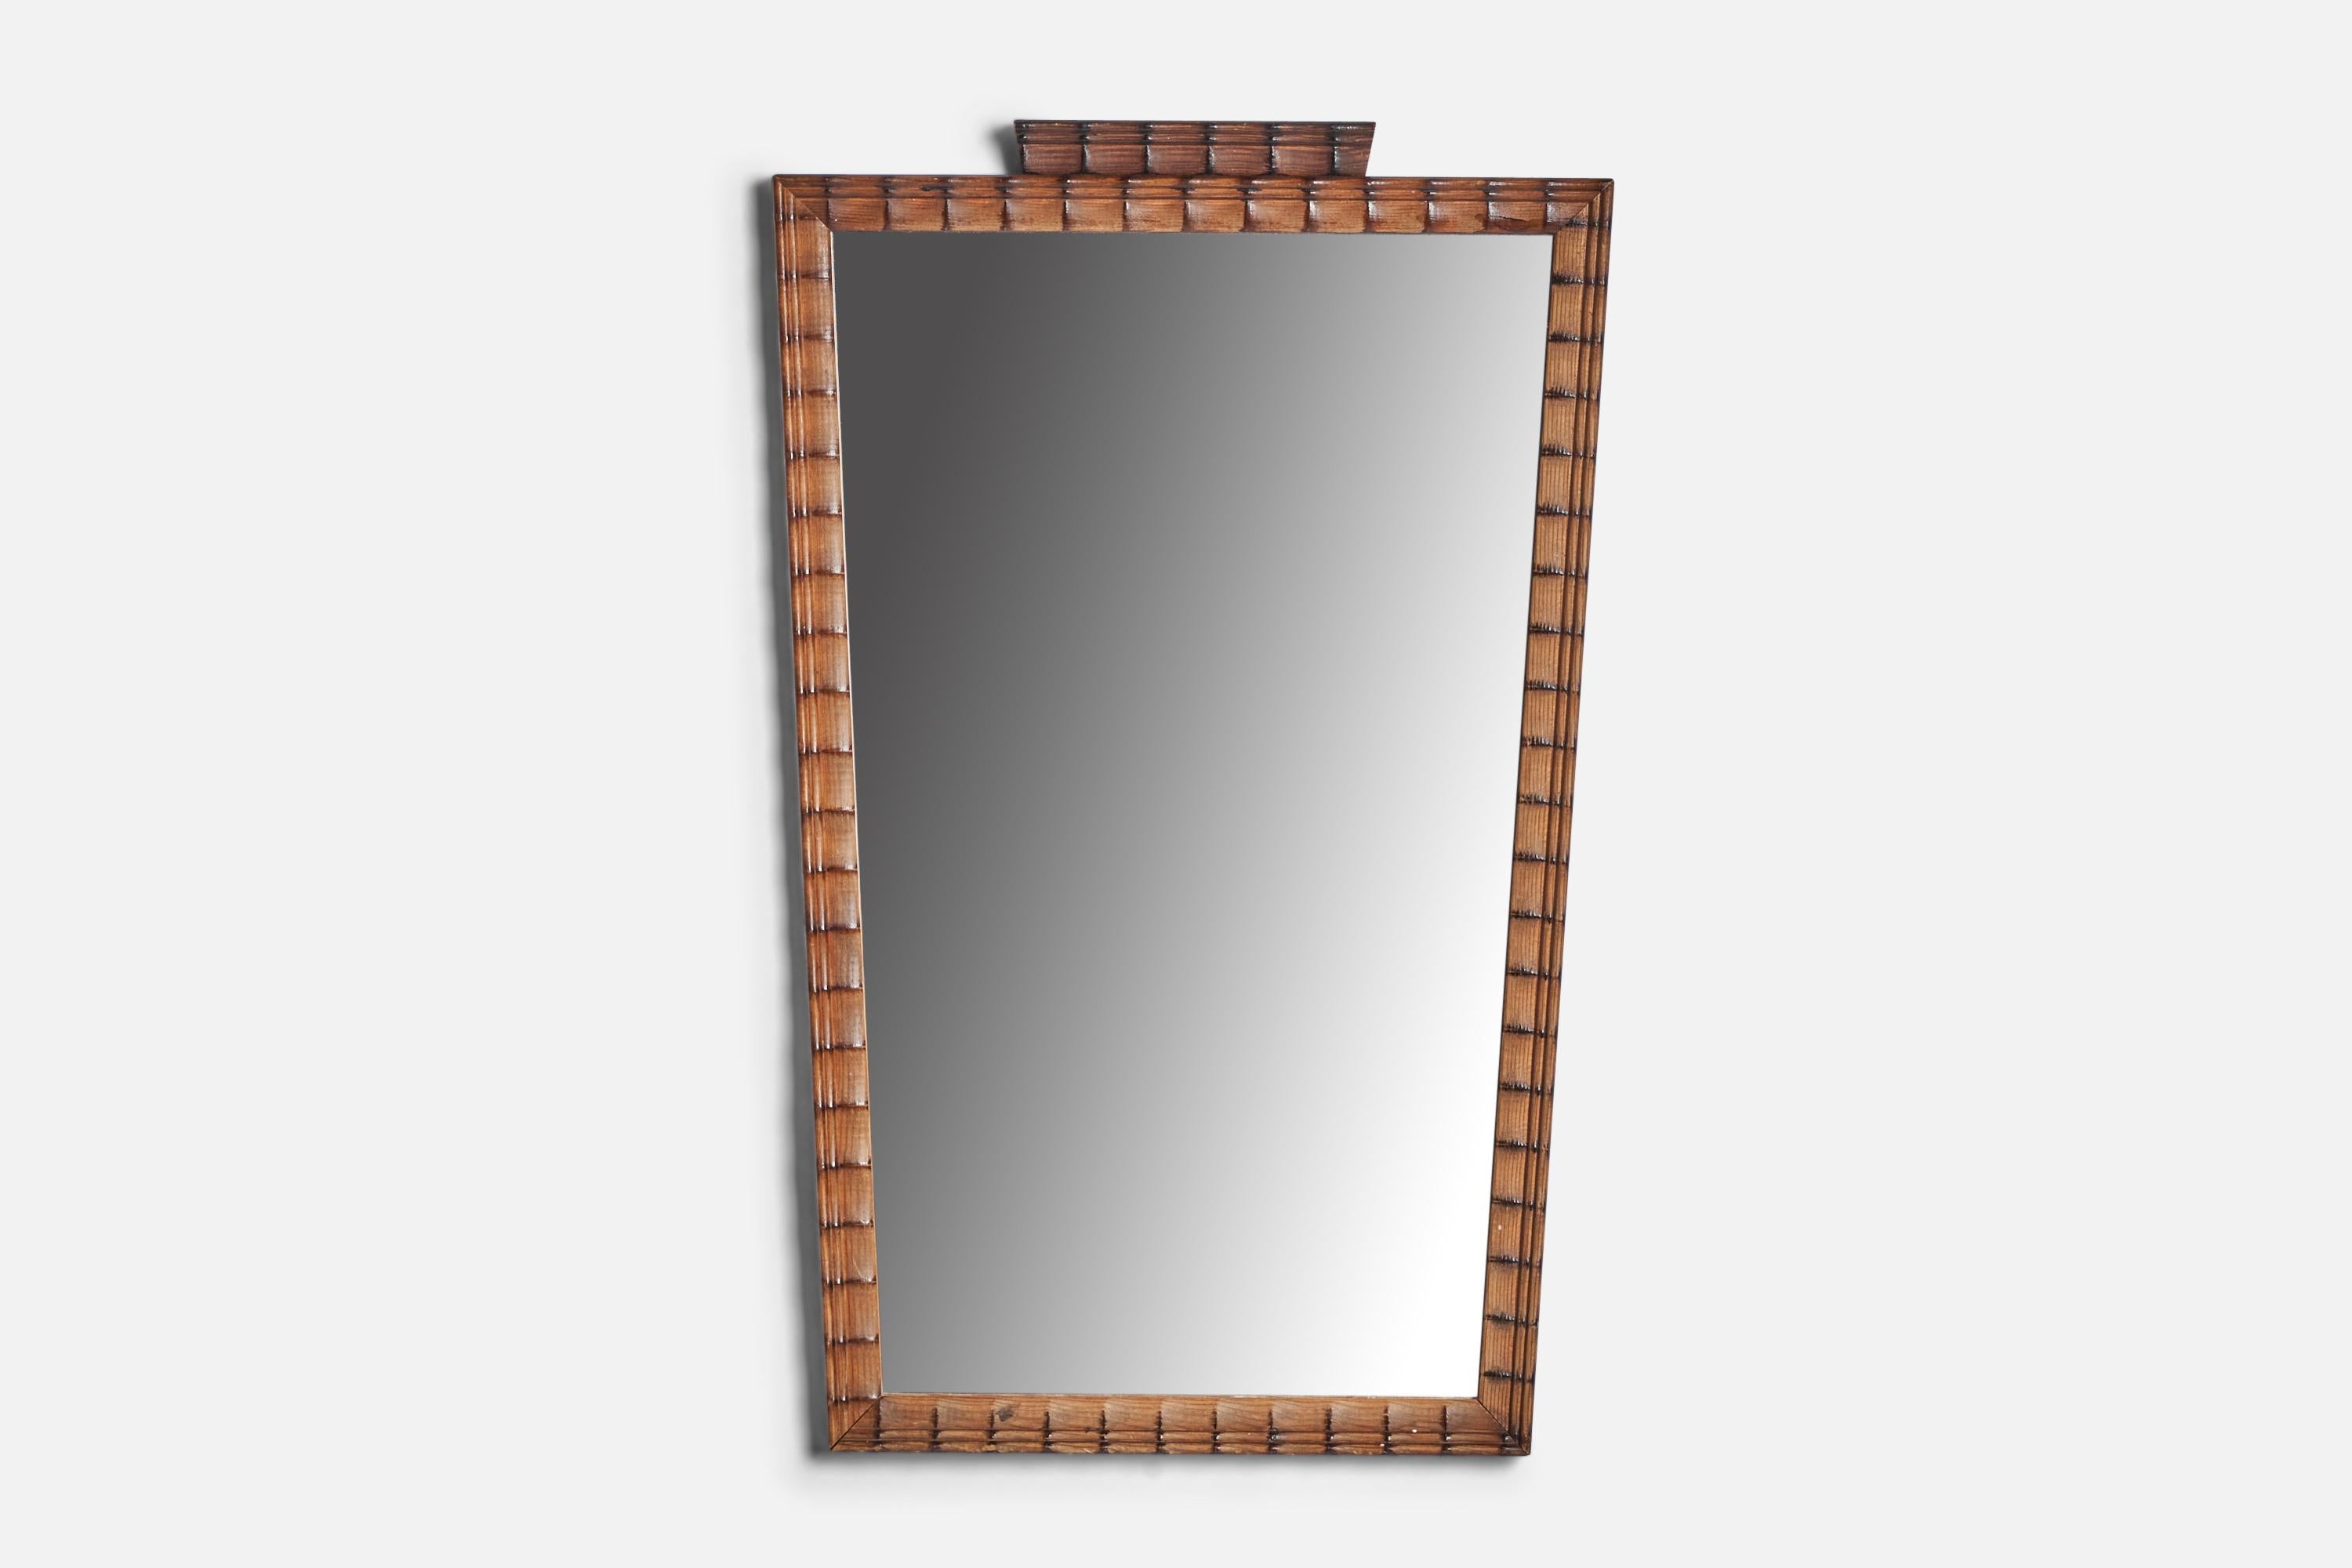 A wood wall mirror designed and produced in Sweden, 1940s.